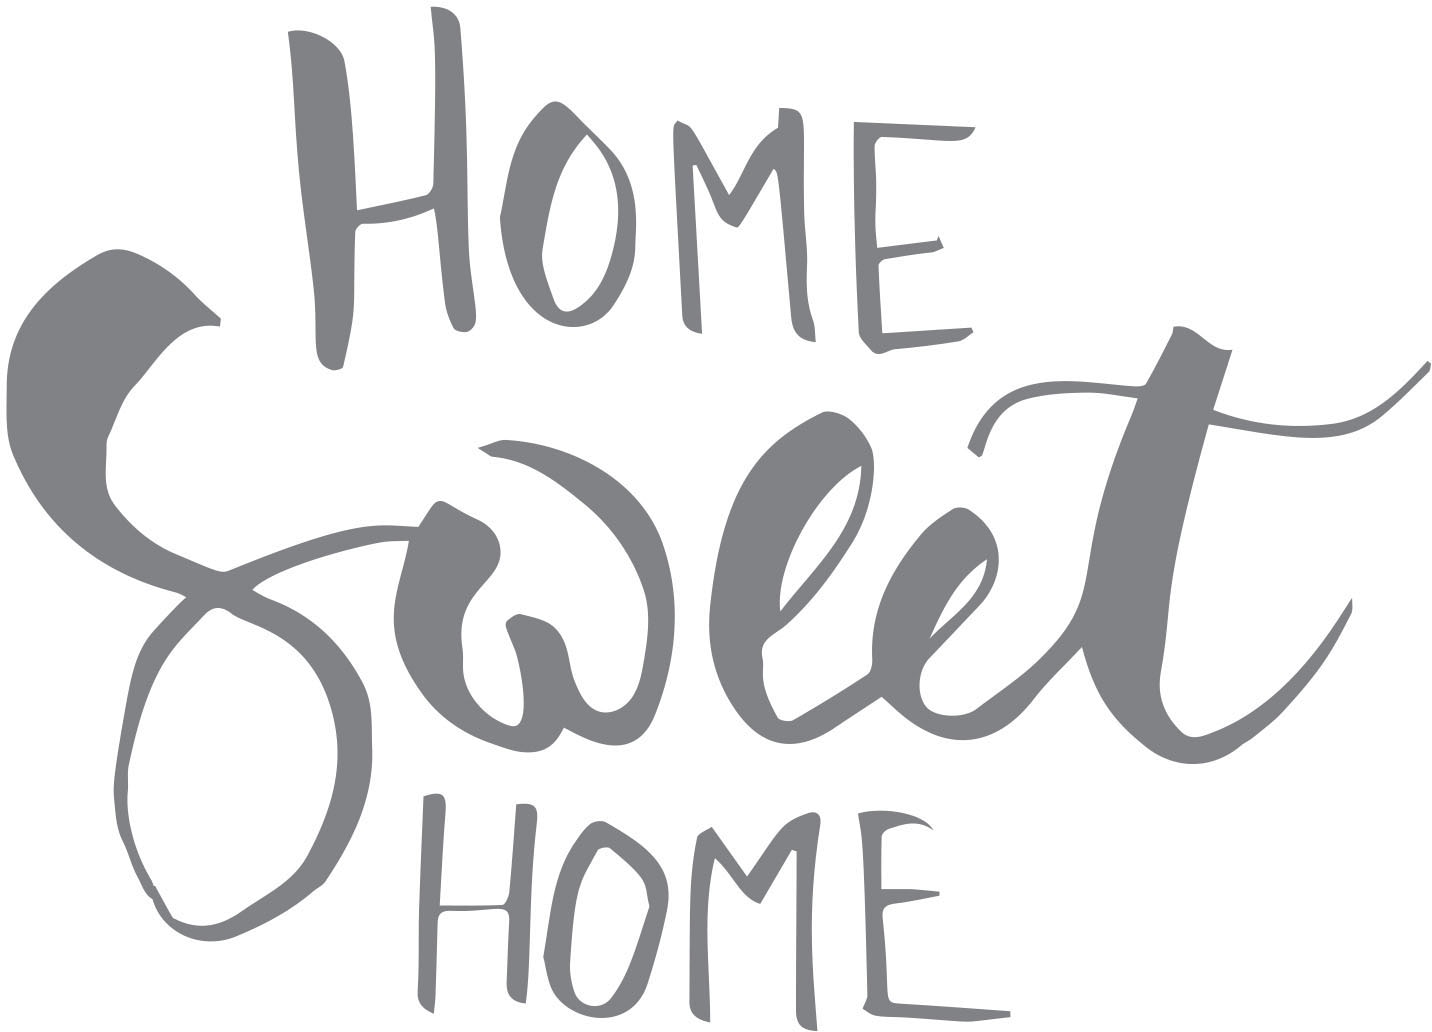 (1 Wandtattoo kaufen HOME«, SWEET »HOME bequem queence St.)